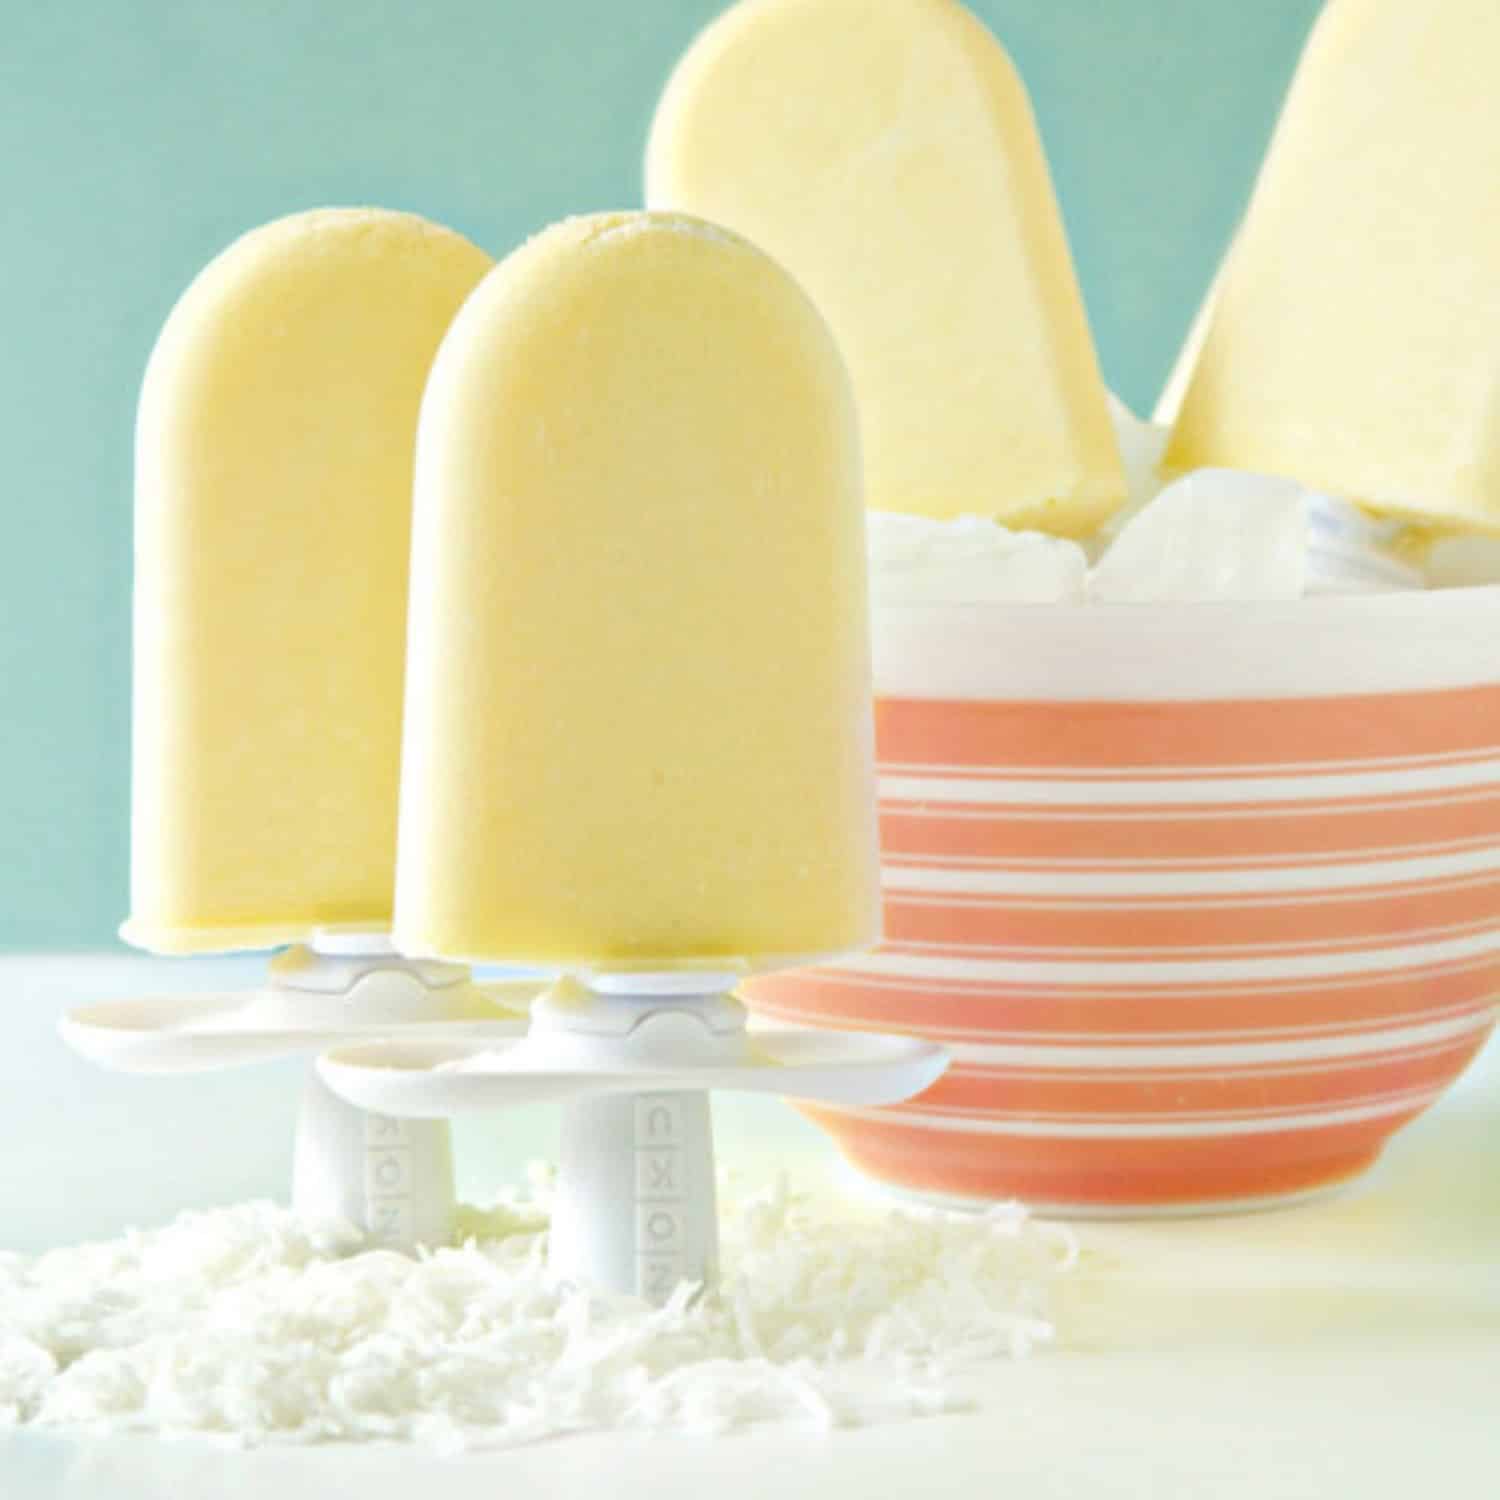 summer popsicle recipes, easy popsicle recipes, boozy popsicle recipes